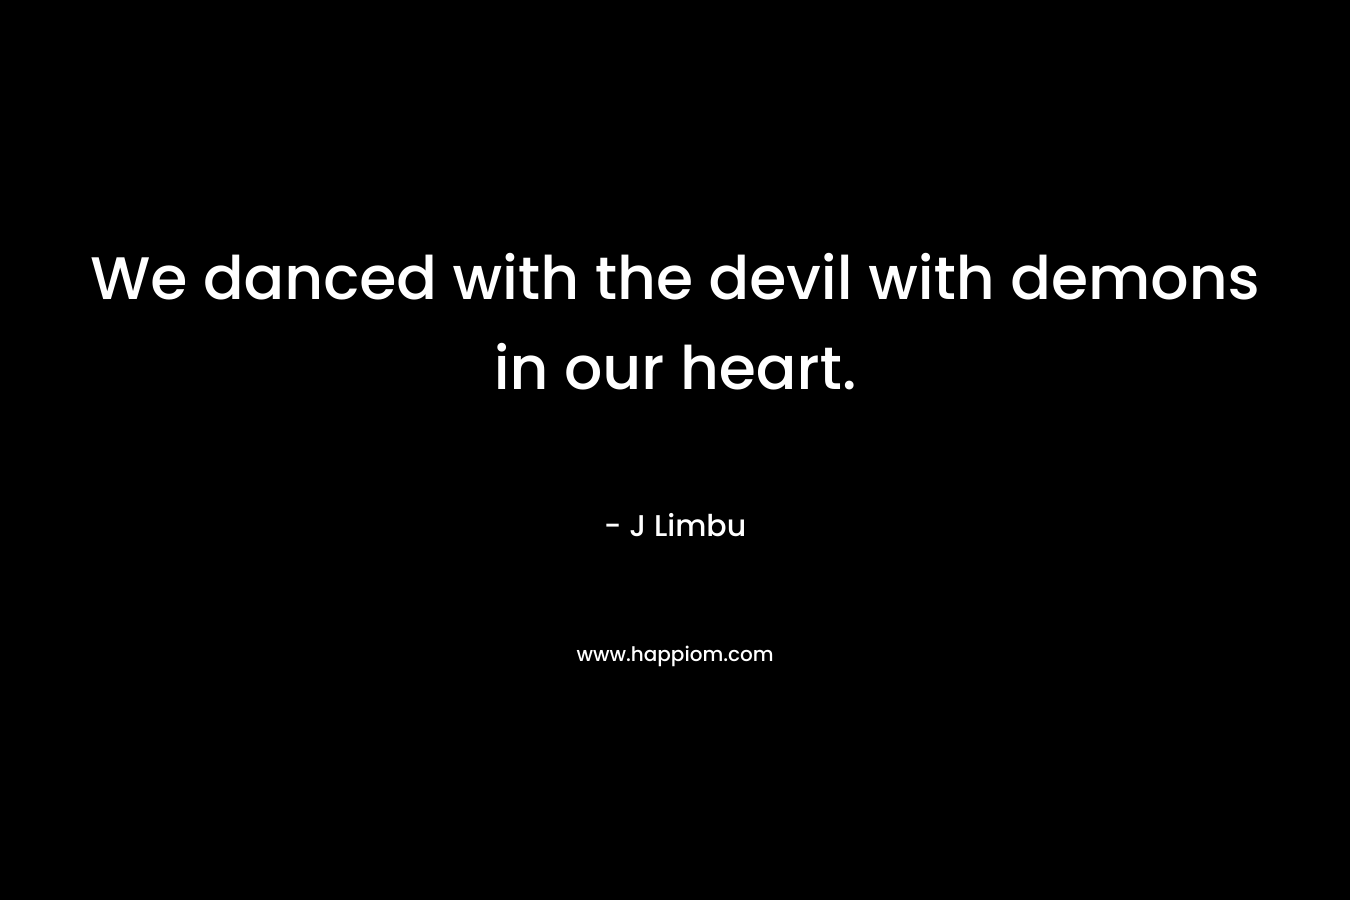 We danced with the devil with demons in our heart.